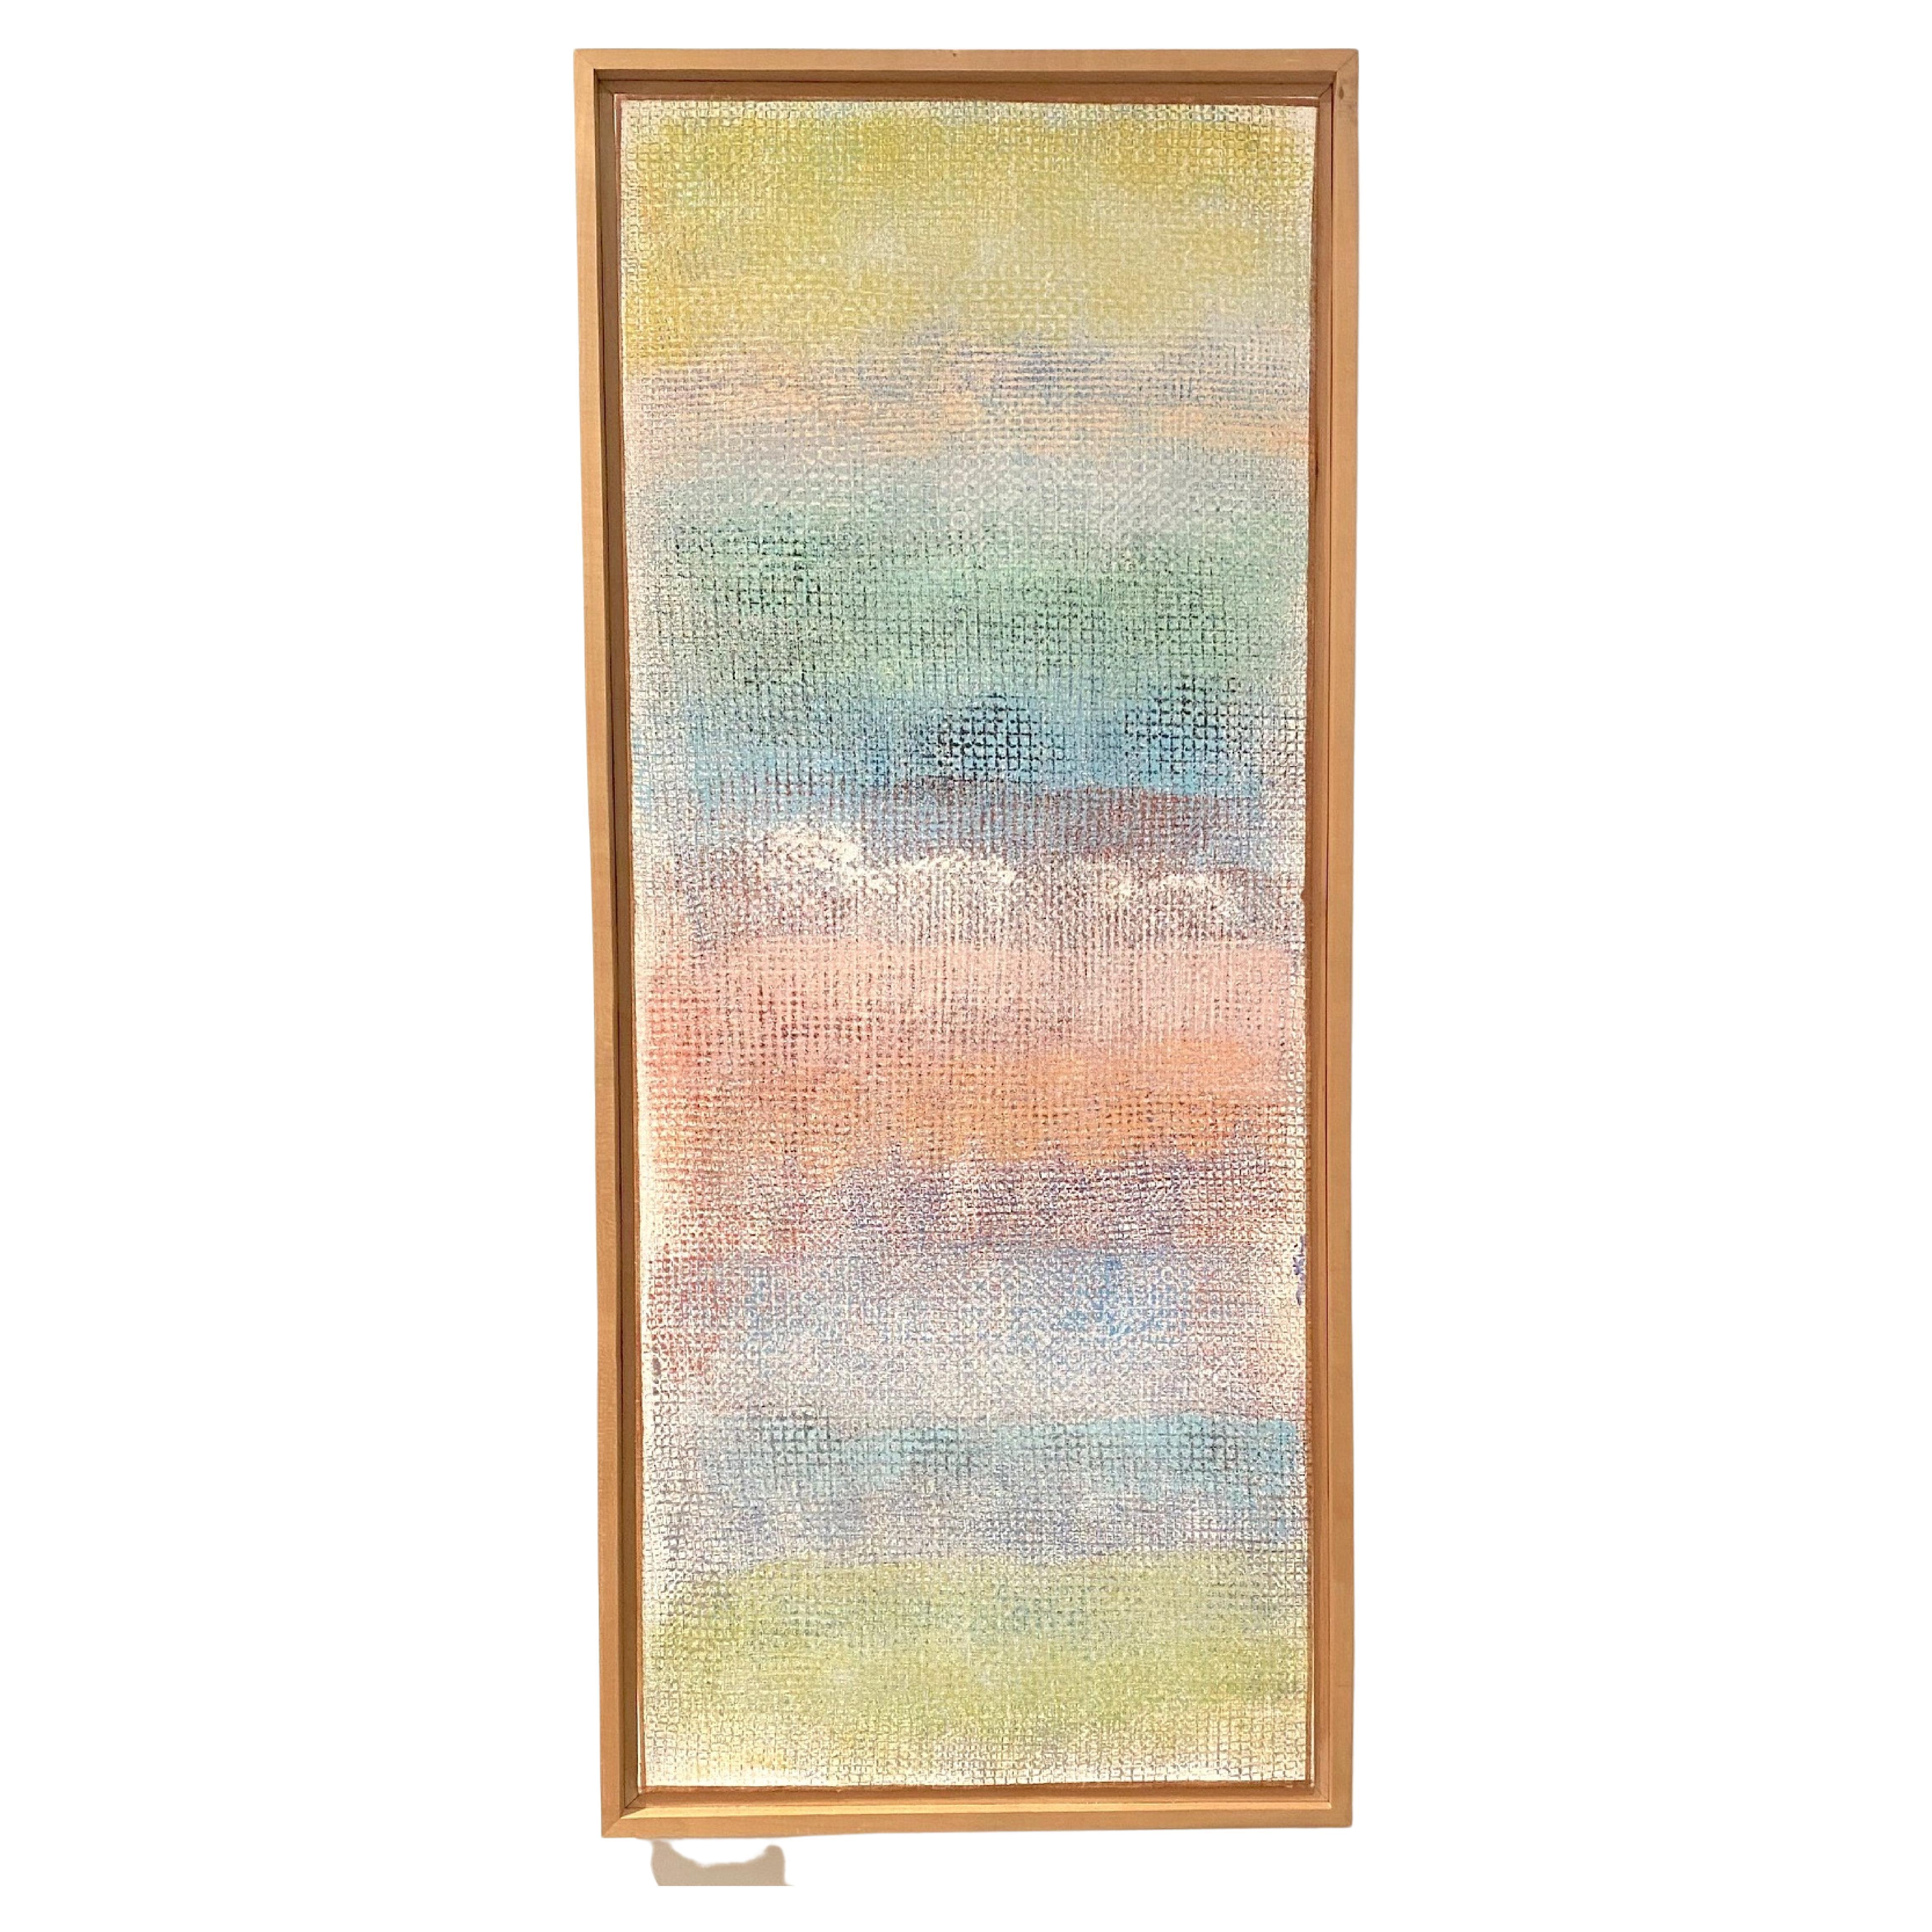 Framed Robert Natkin Abstract Painting on Canvas in Pastel Tones